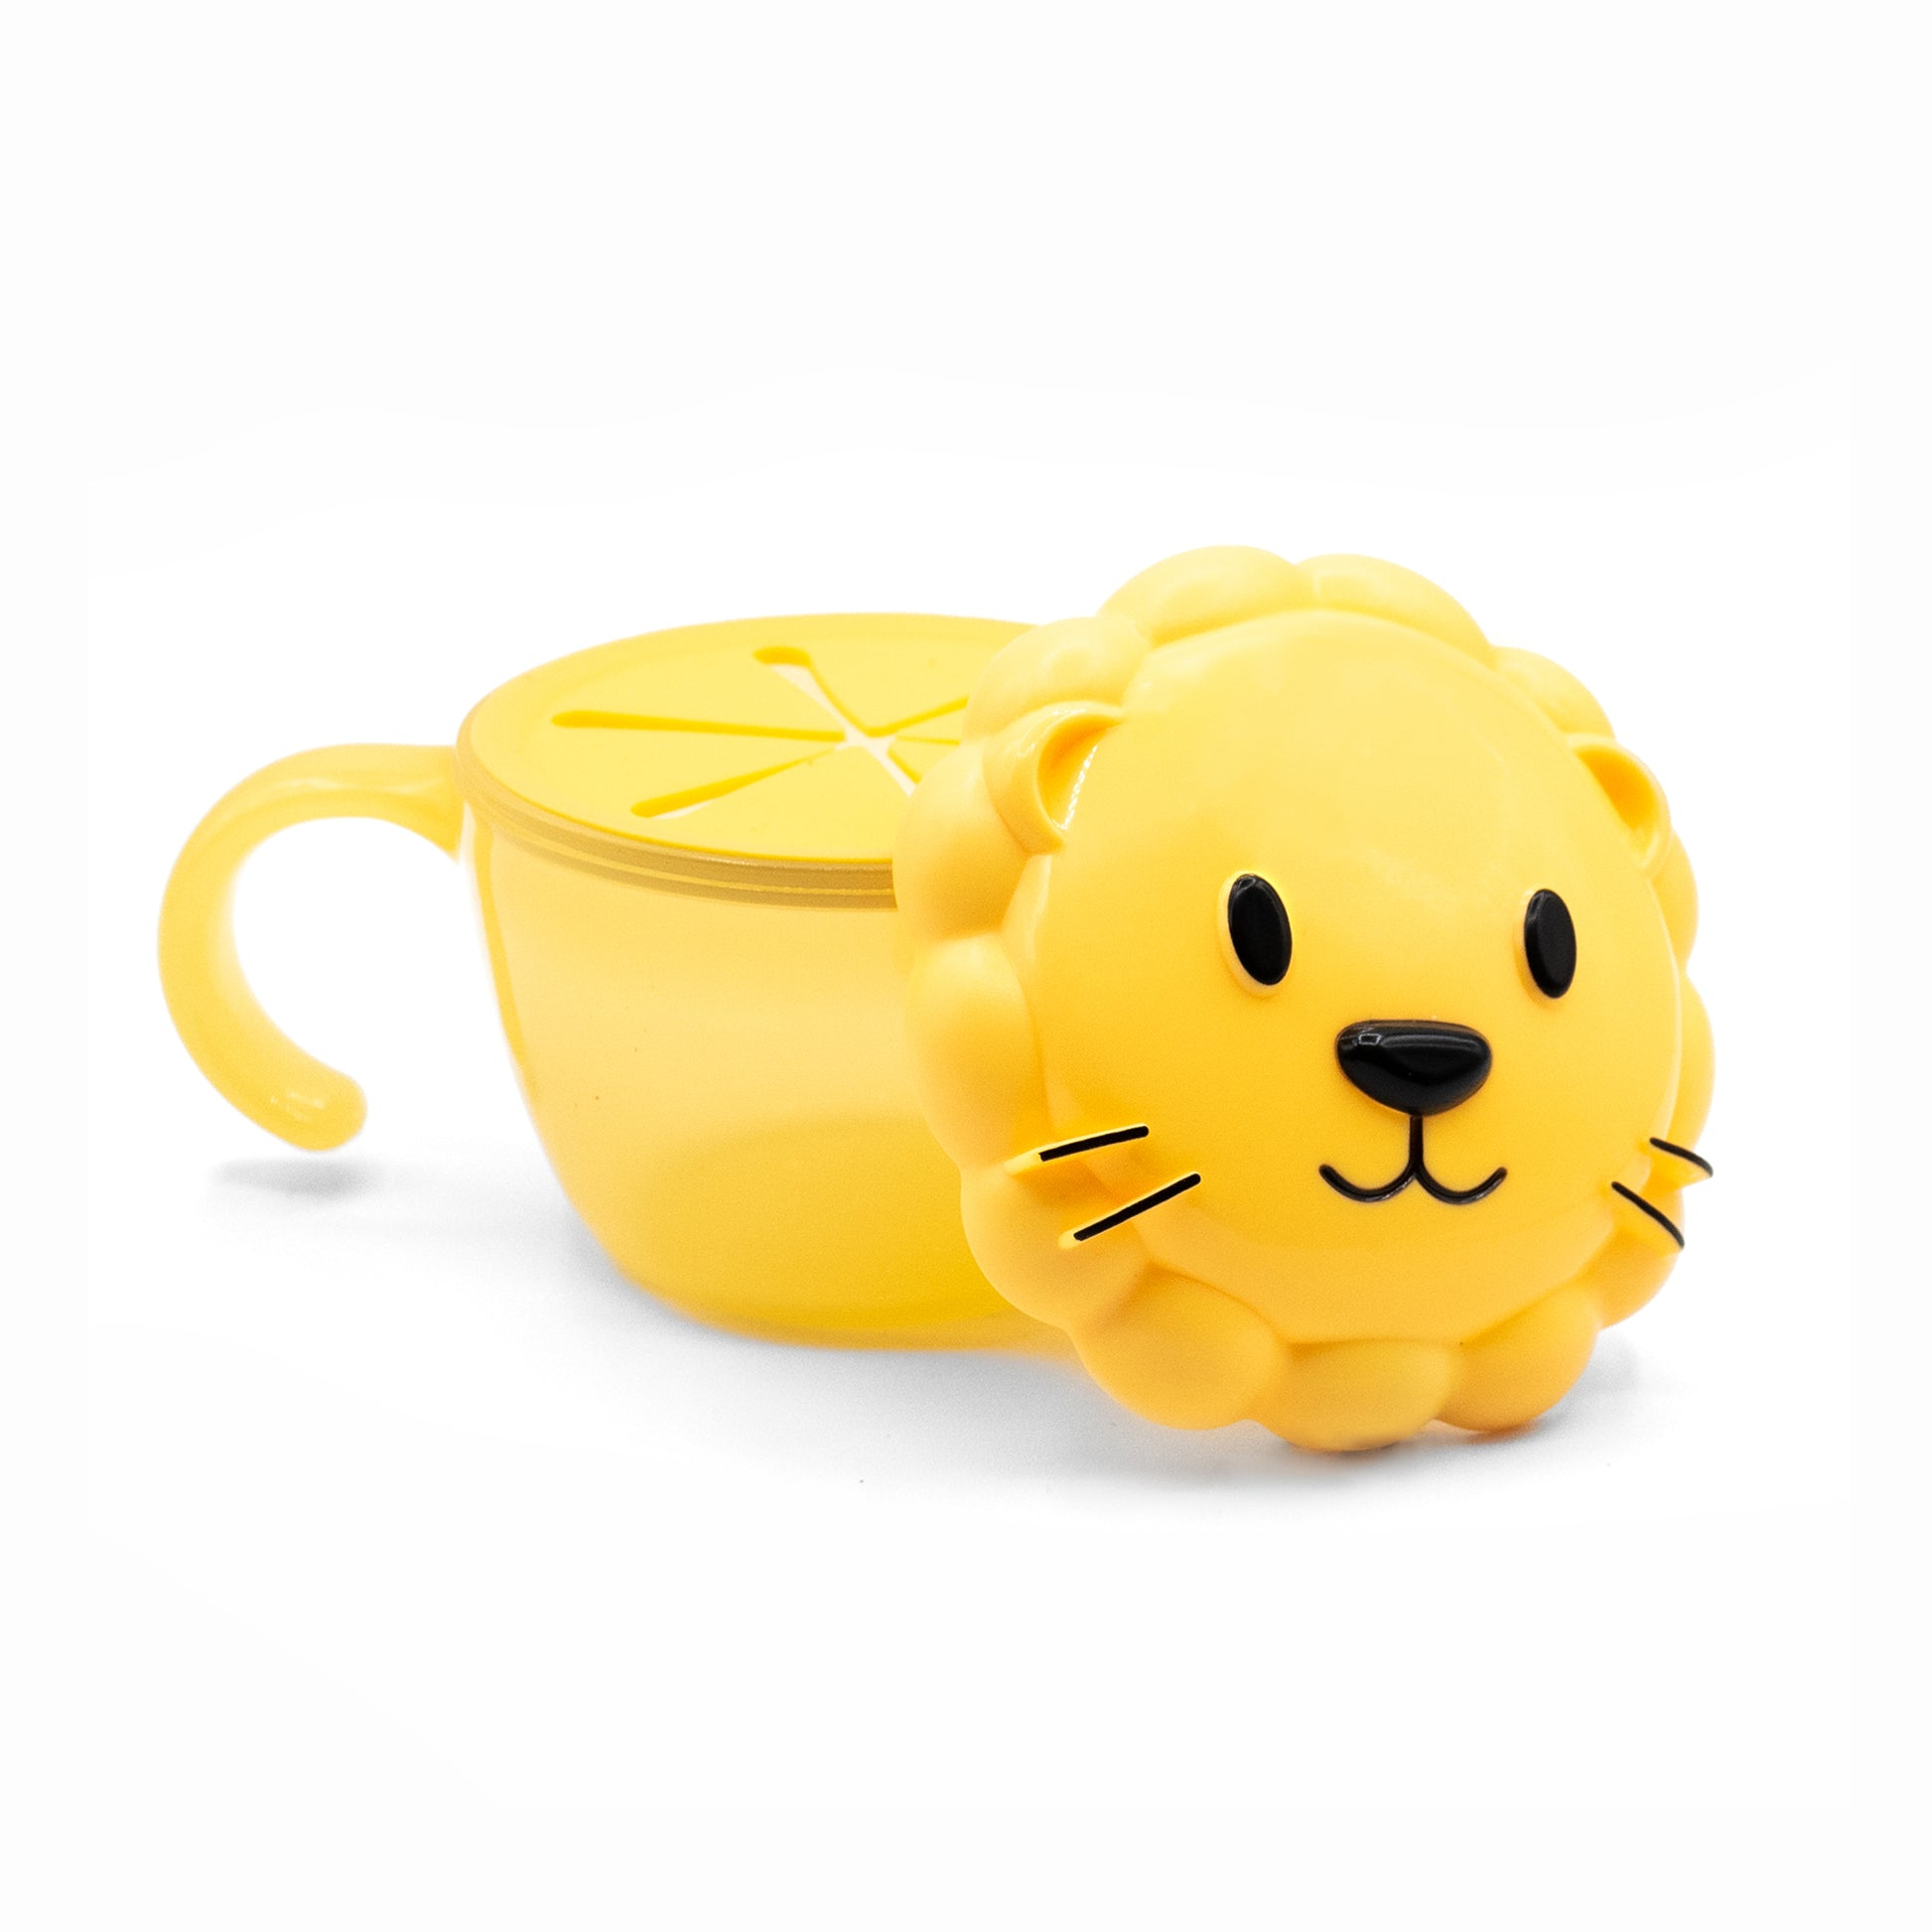 melii Snack Container for Kids - Yellow Lion Design Mess Free, Adaptable, and Easy to Hold with Removable Finger Trap - Perfect for Independent Snacking, Travel - BPA Free and Dishwasher Safe